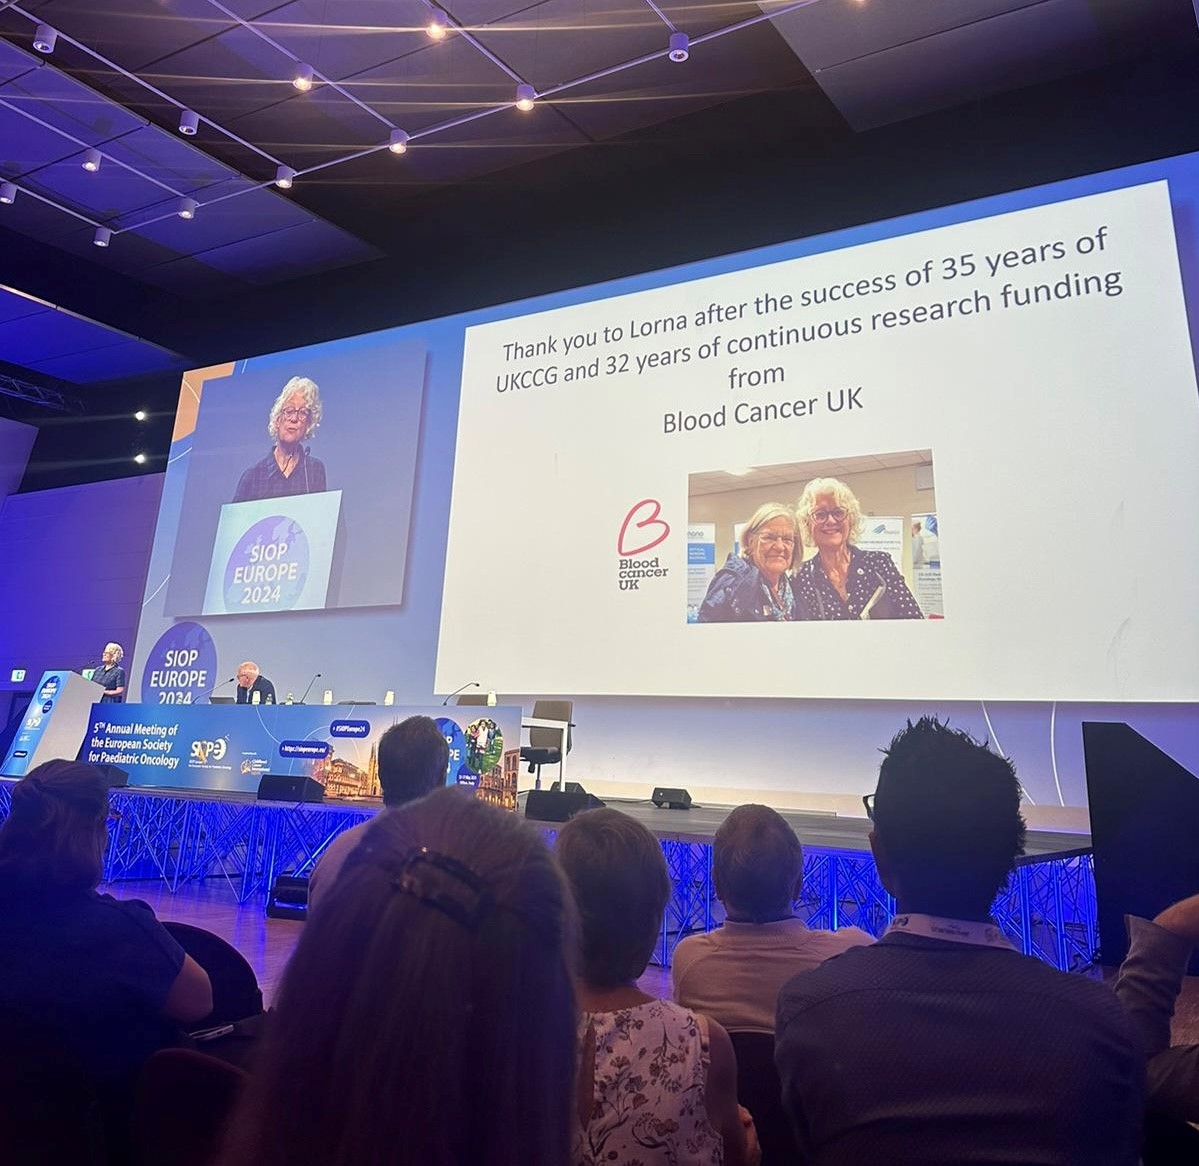 Wonderful to see our Trustee, Christine Harrison, receive a well deserved standing ovation for her Guest Lecture at #SIOPEurope2024, showcasing her career in leukaemia cytogenetics, which we have been delighted to support!